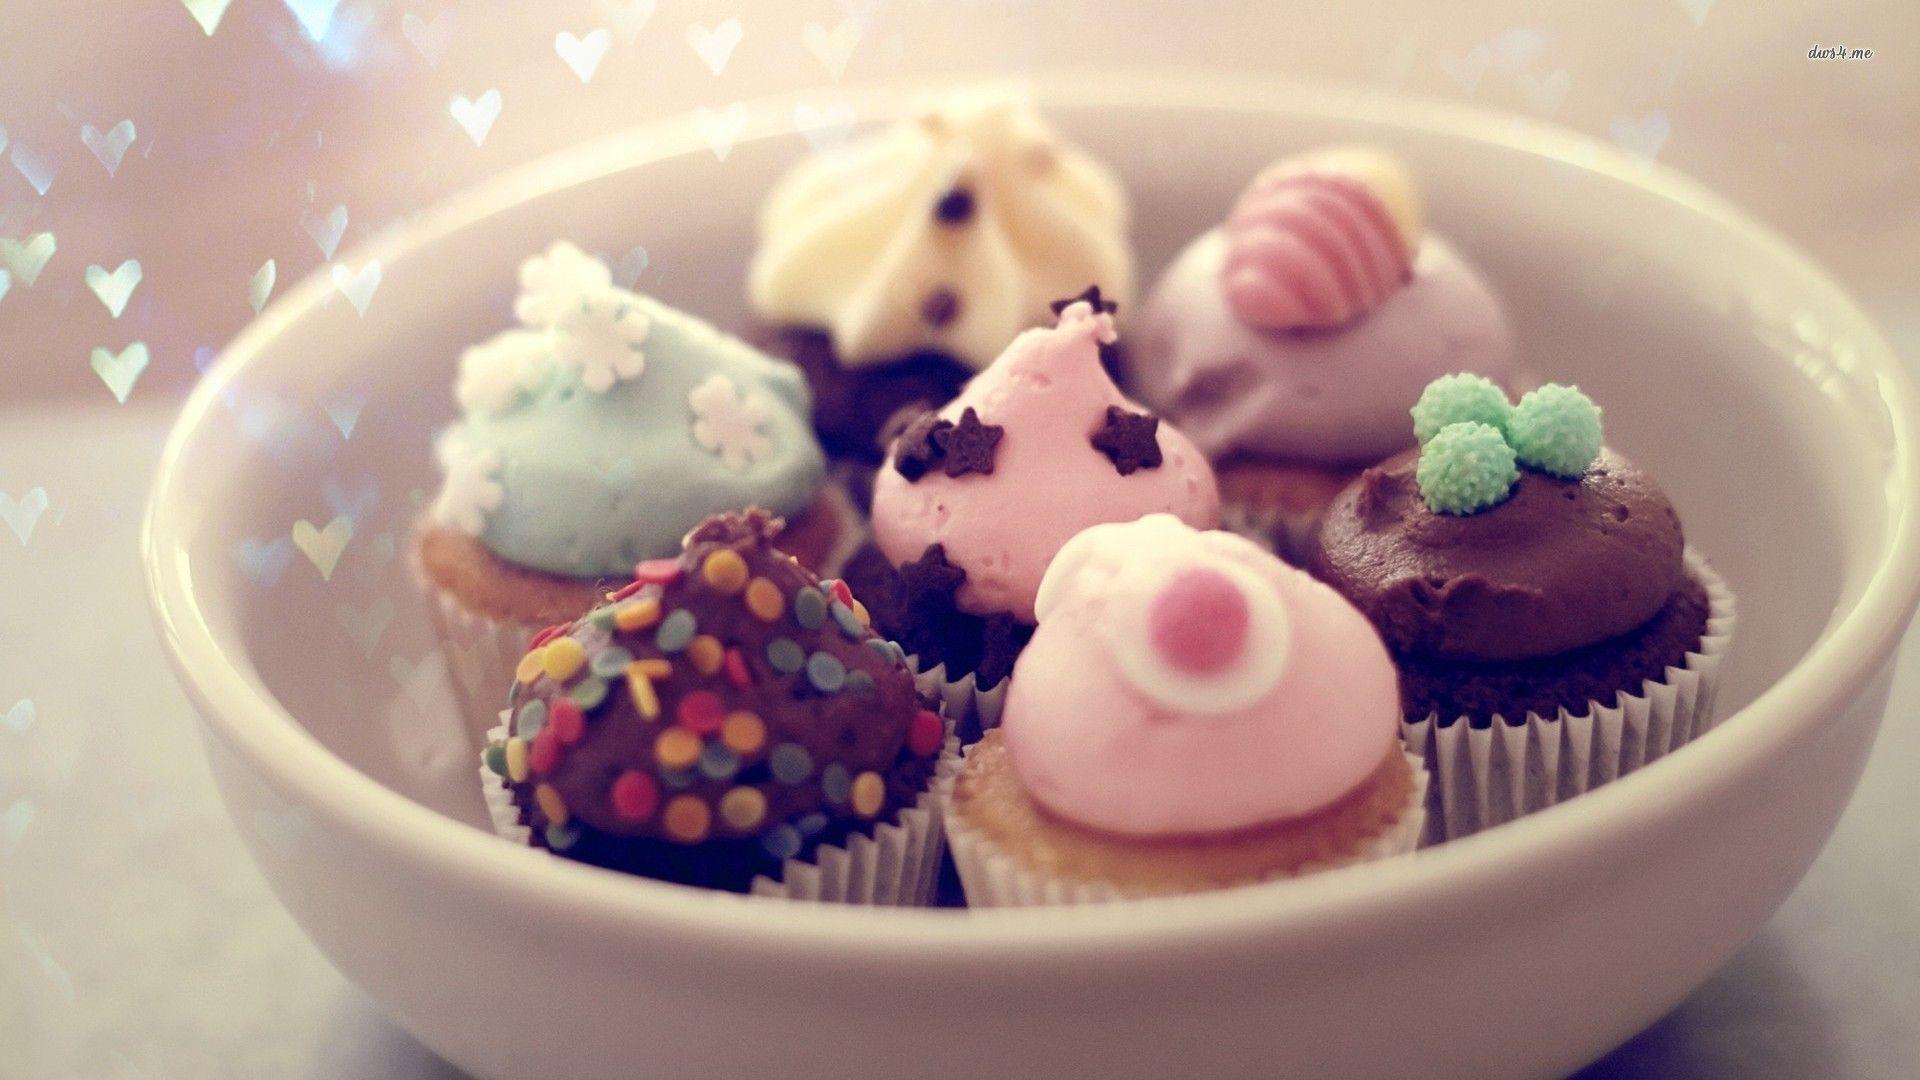 best image about Cupcakes Wallpaper for iPhone. HD